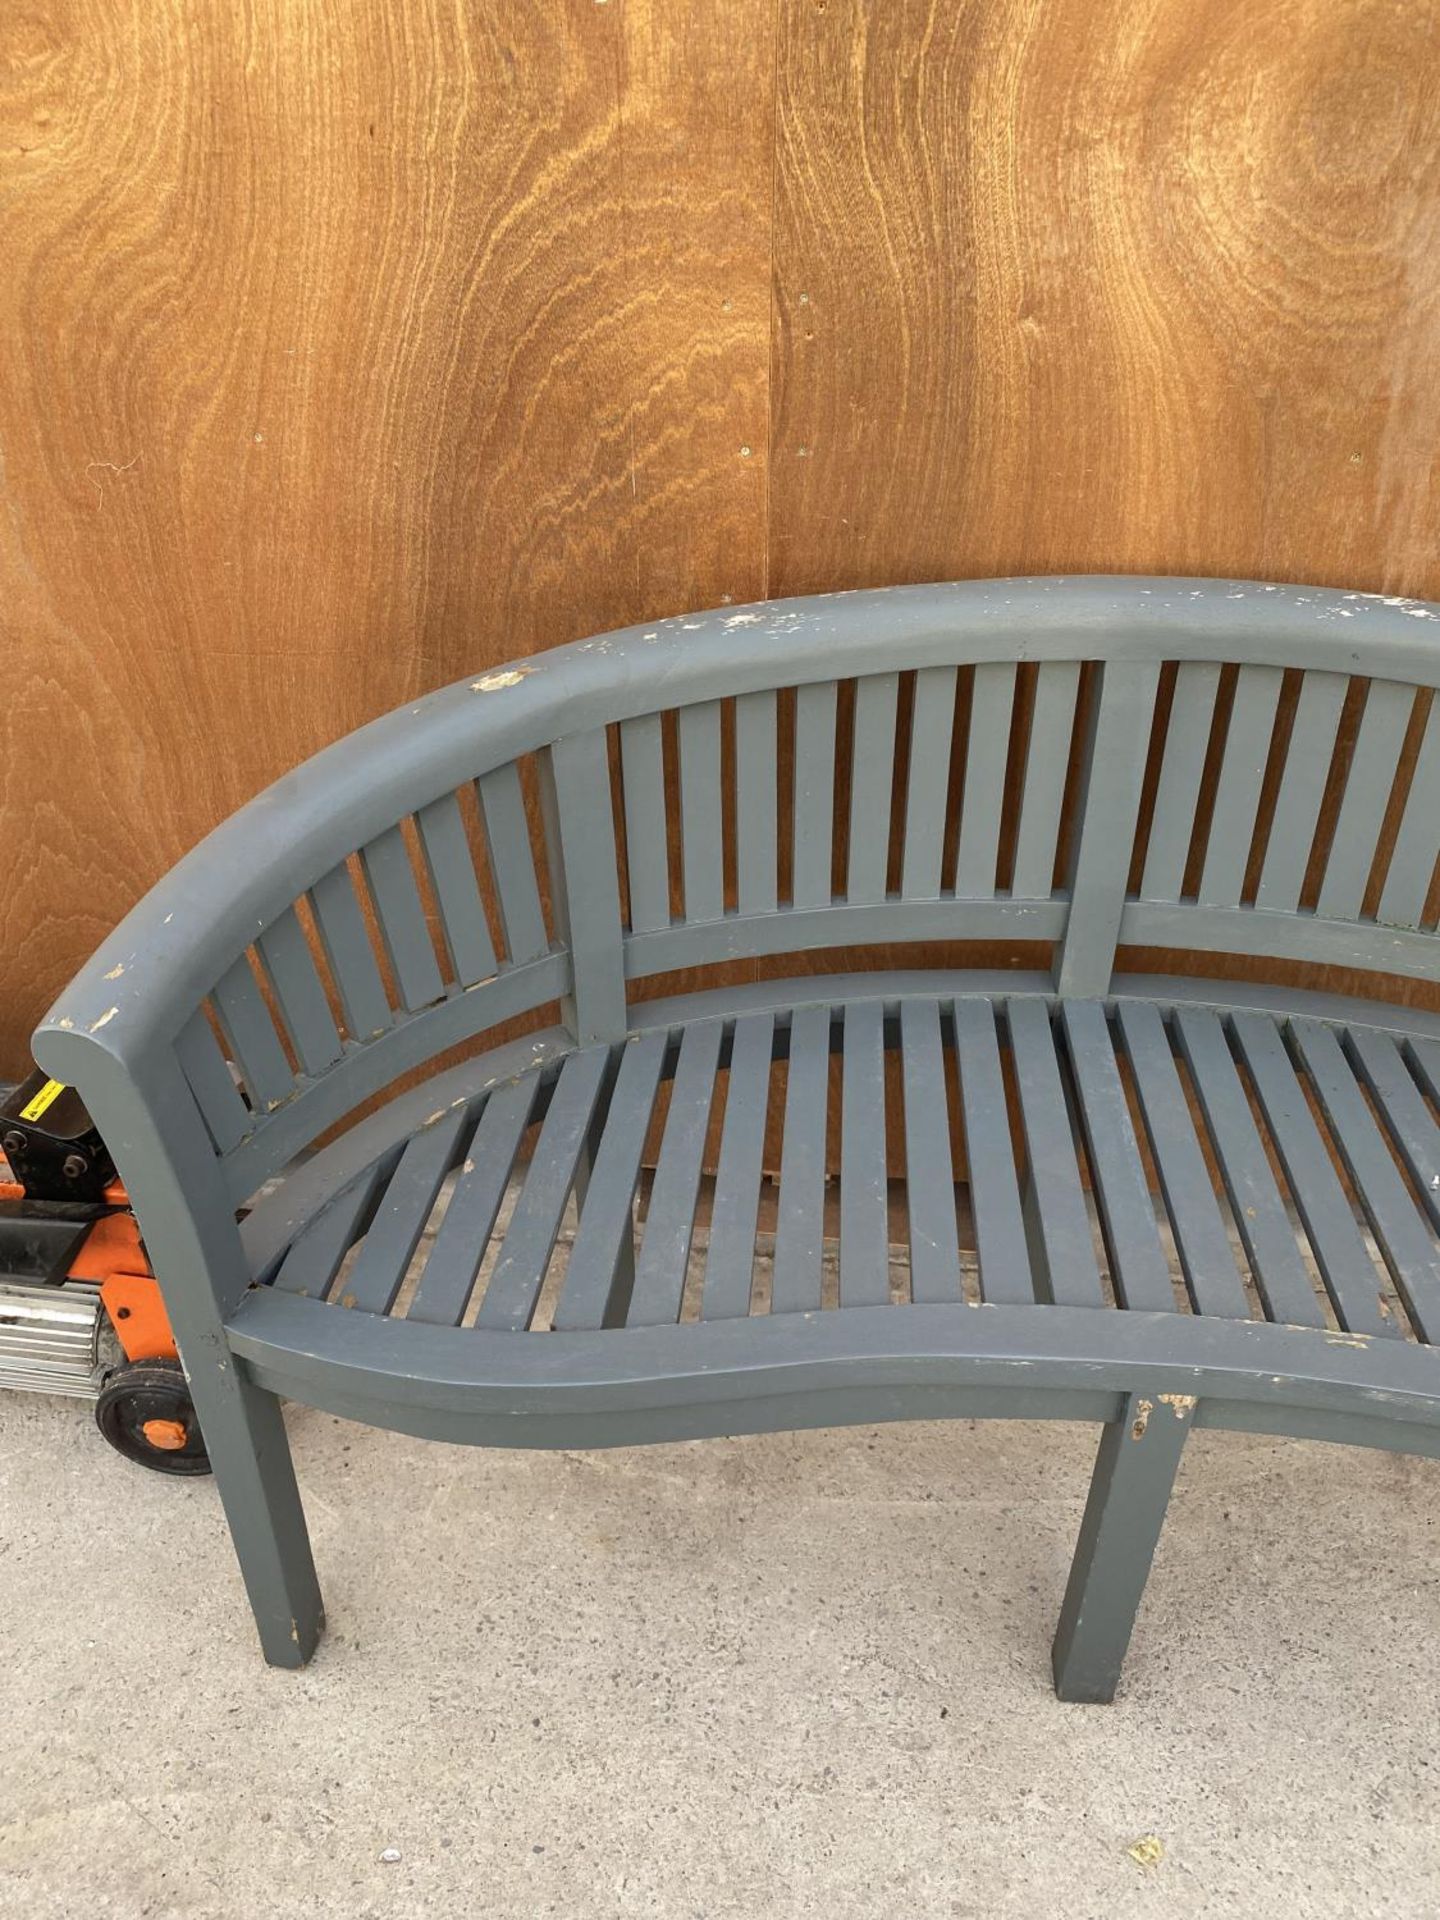 A WOODEN SLATTED CURVED GARDEN BENCH - Image 2 of 4